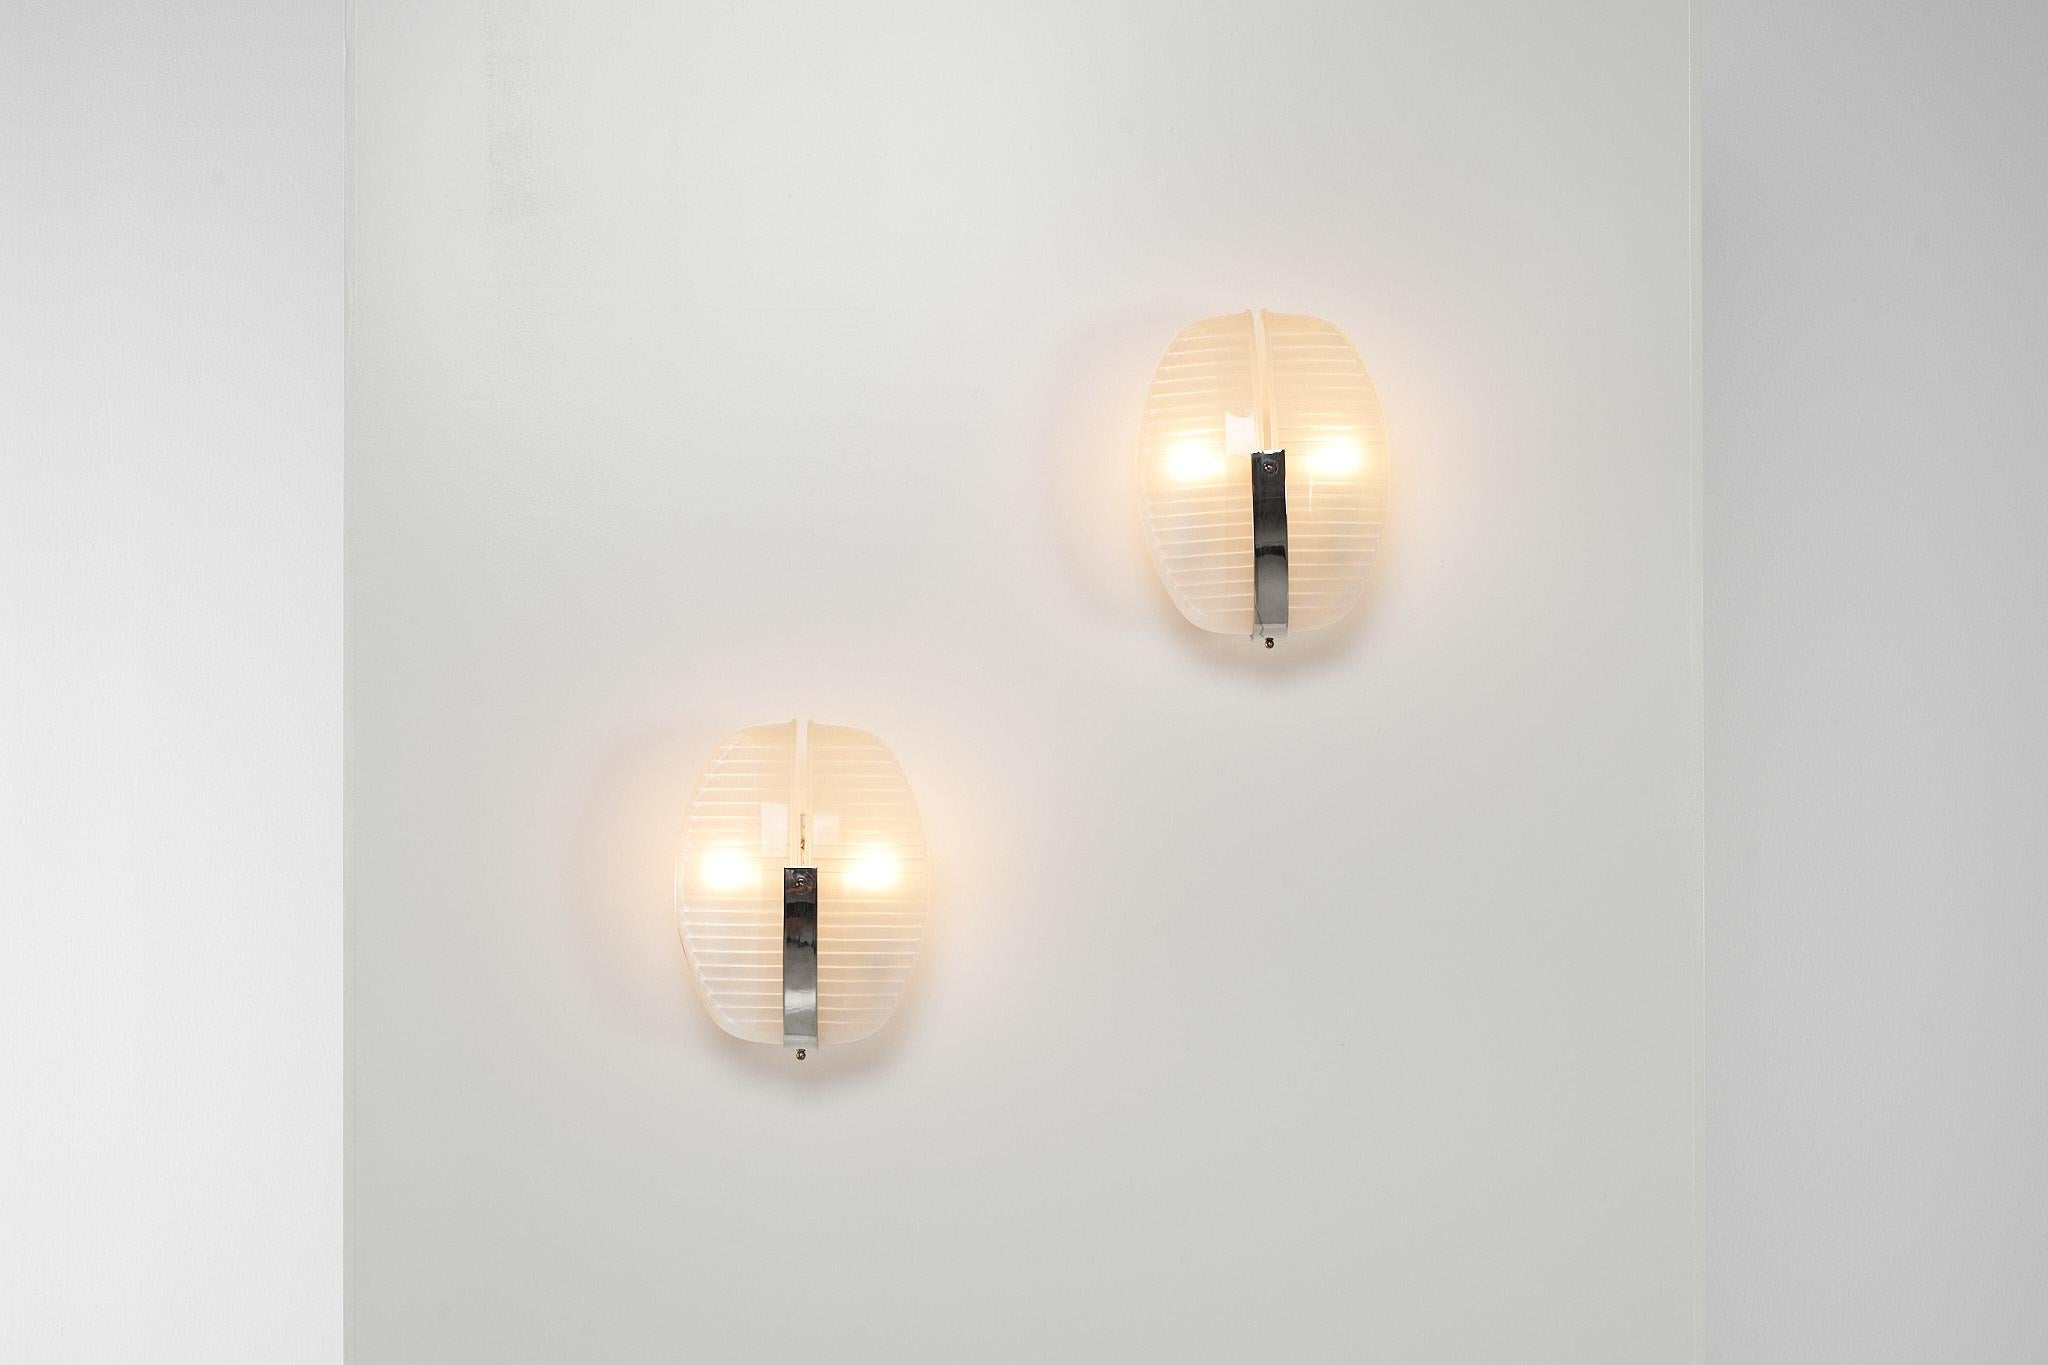 Nice industrial looking set of wall lamps model 'Lambda' designed by Vico Magistretti and manufactured by Artemide, Italy 1961. These lamps have a chrome and nickel-plated structure, which connects 2 nicely shaped, pressed crystal glass diffuser